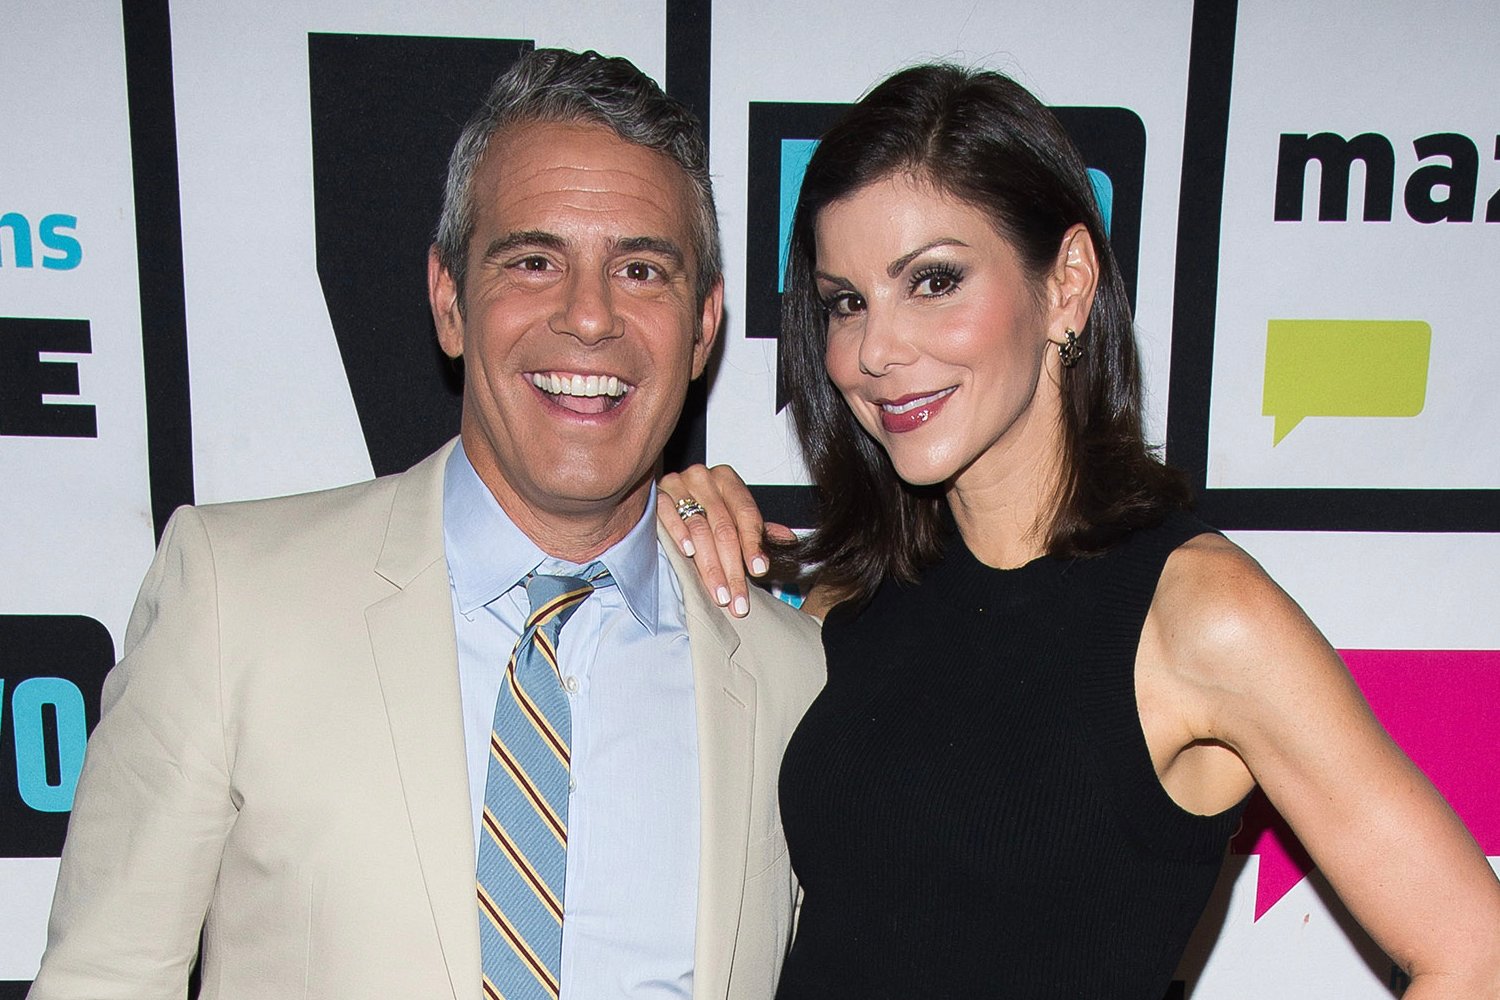 Andy Cohen and Heather Dubrow posing and smiling